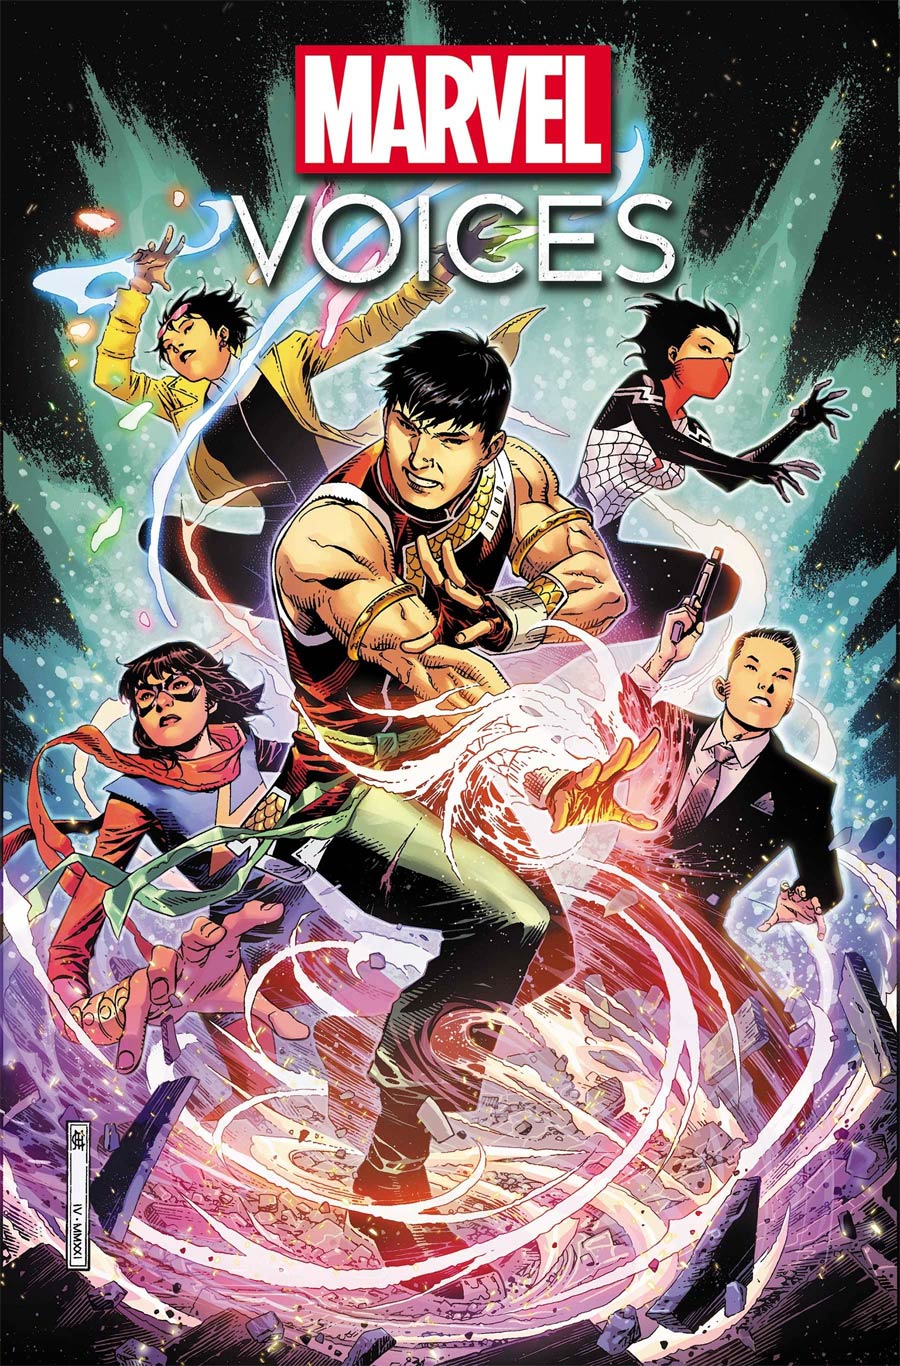 Marvels Voices Identity #1 By Jim Cheung Poster